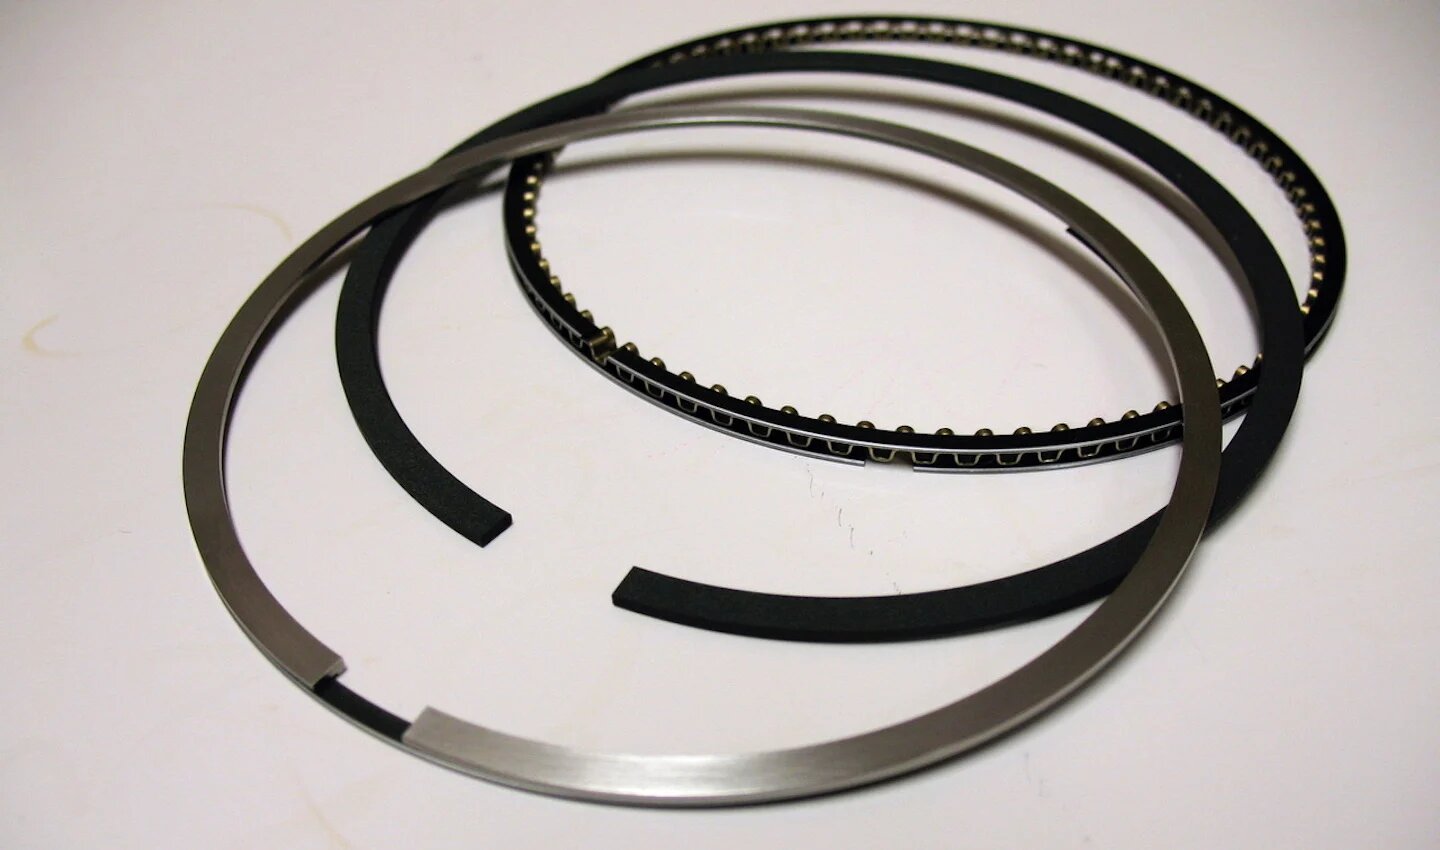 Things operators should know about modern piston ring design